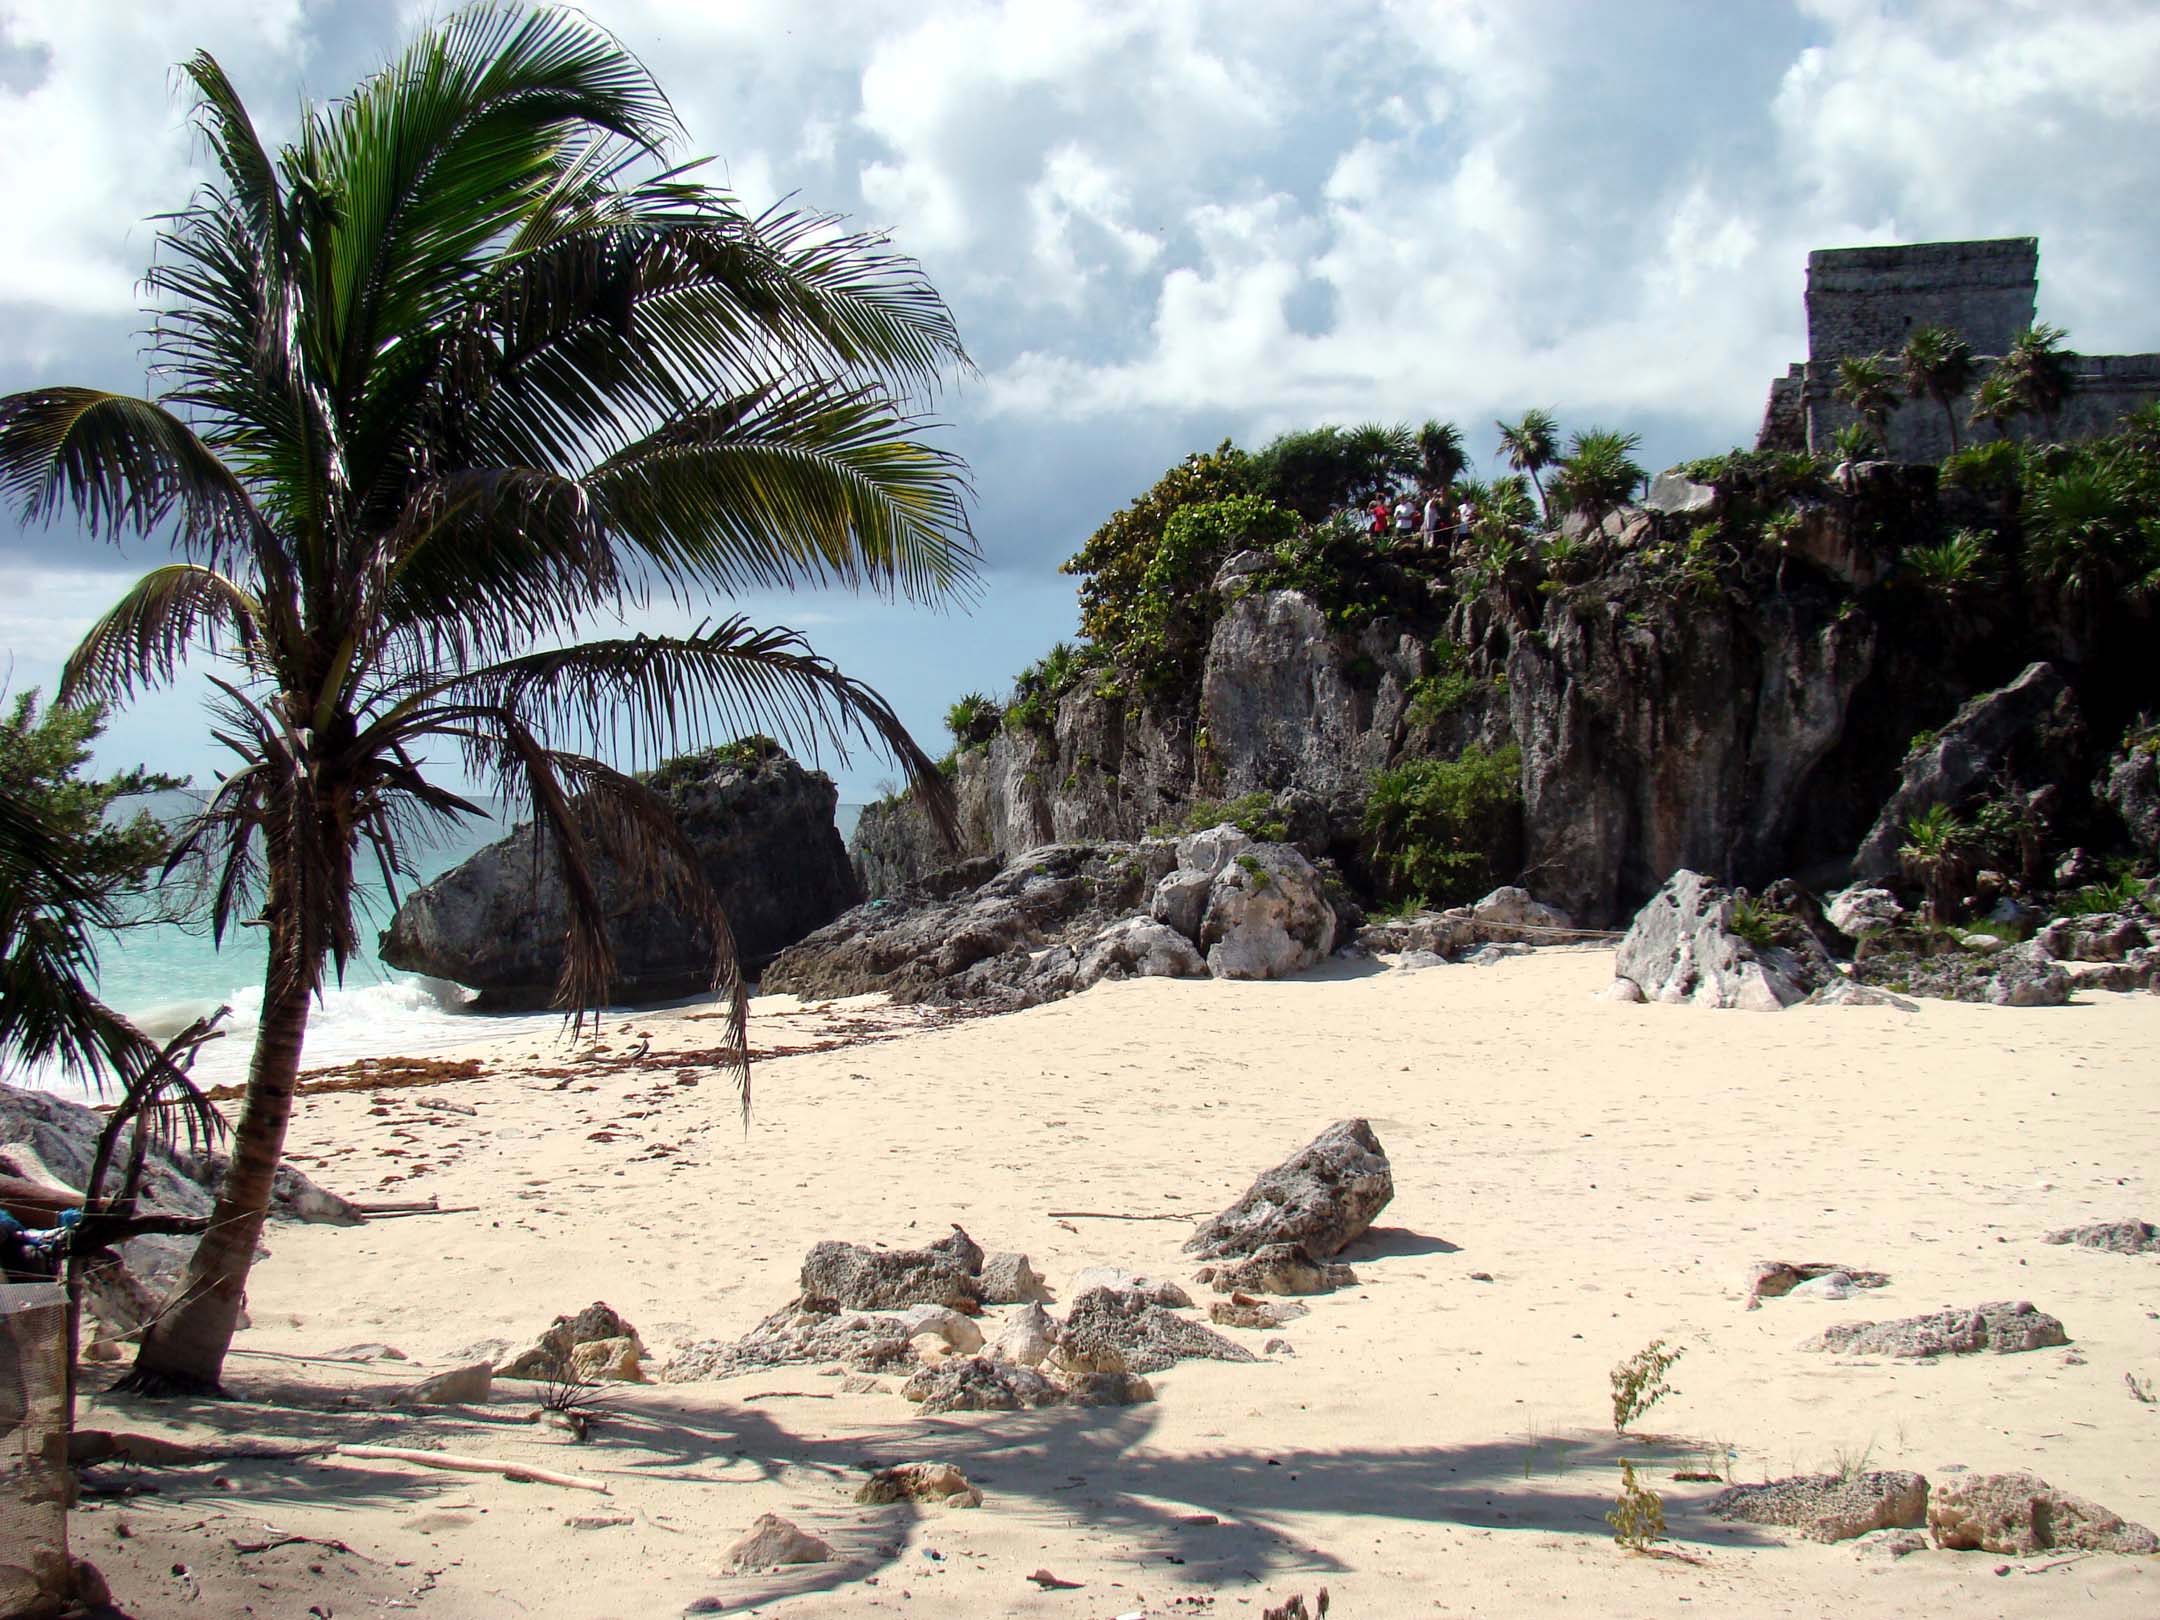 The Tulum ruins by Melody Moser